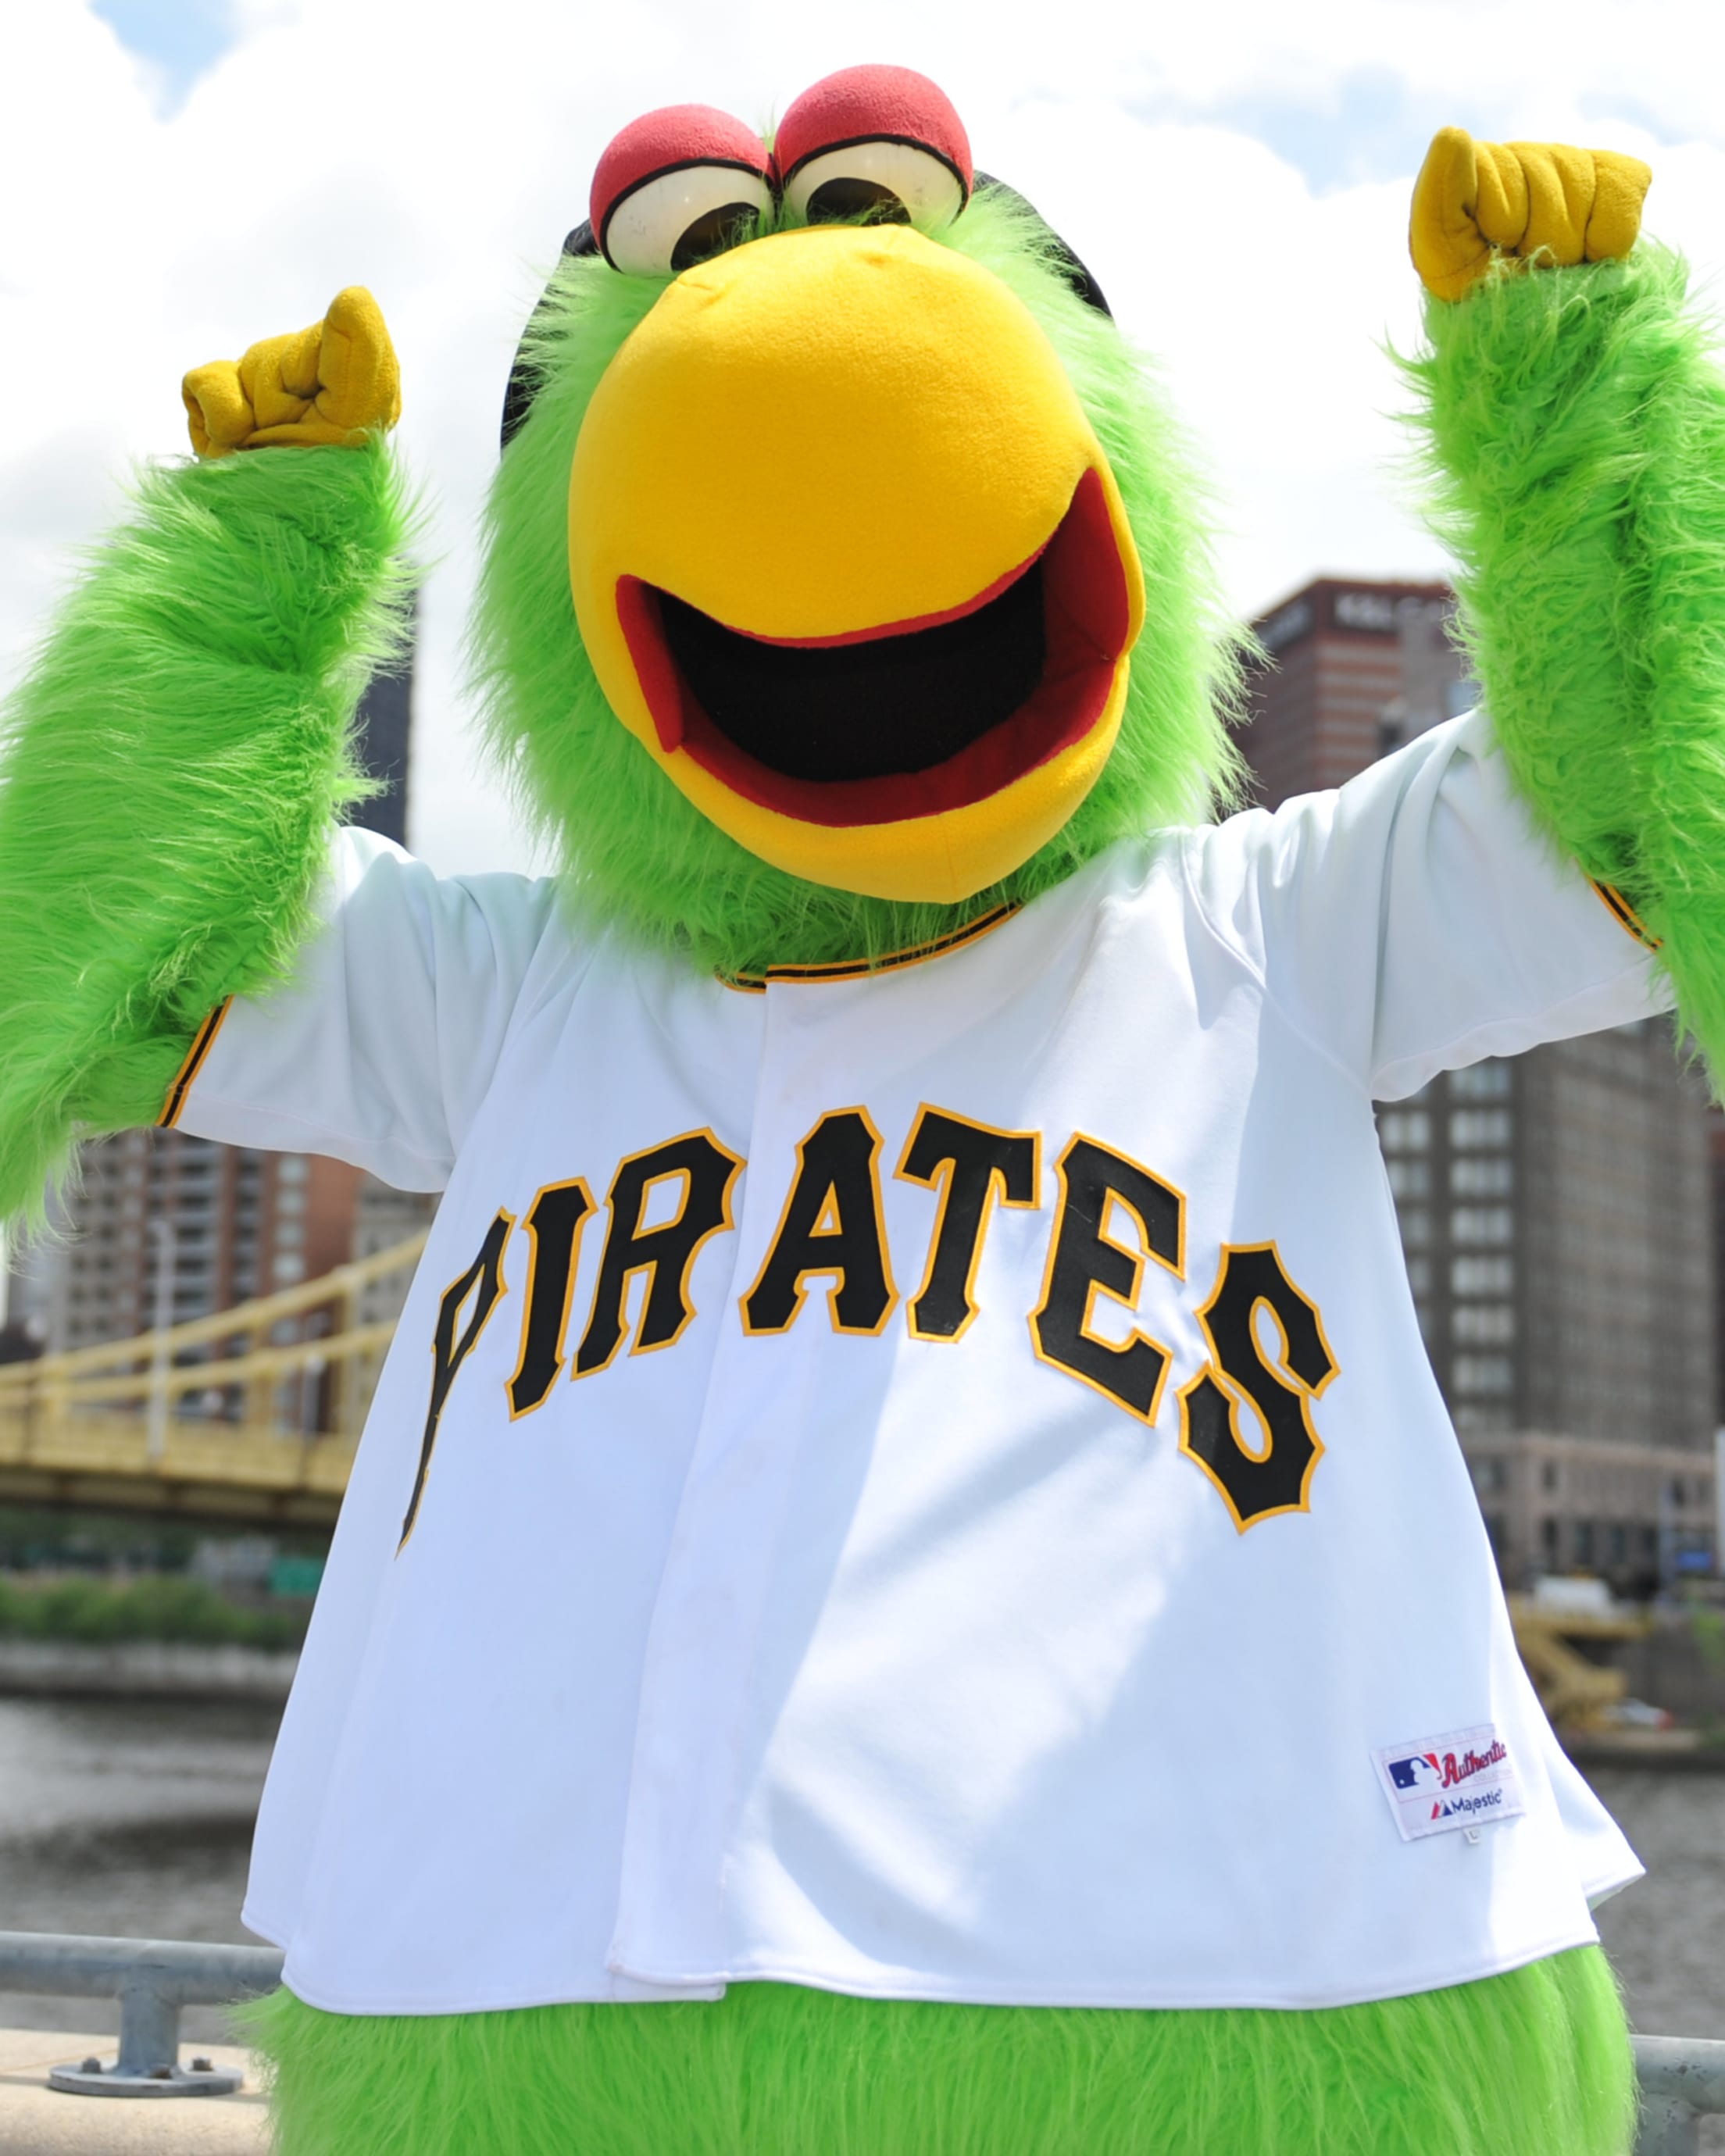 Pittsburgh Pirate Mascot parrot painted rock